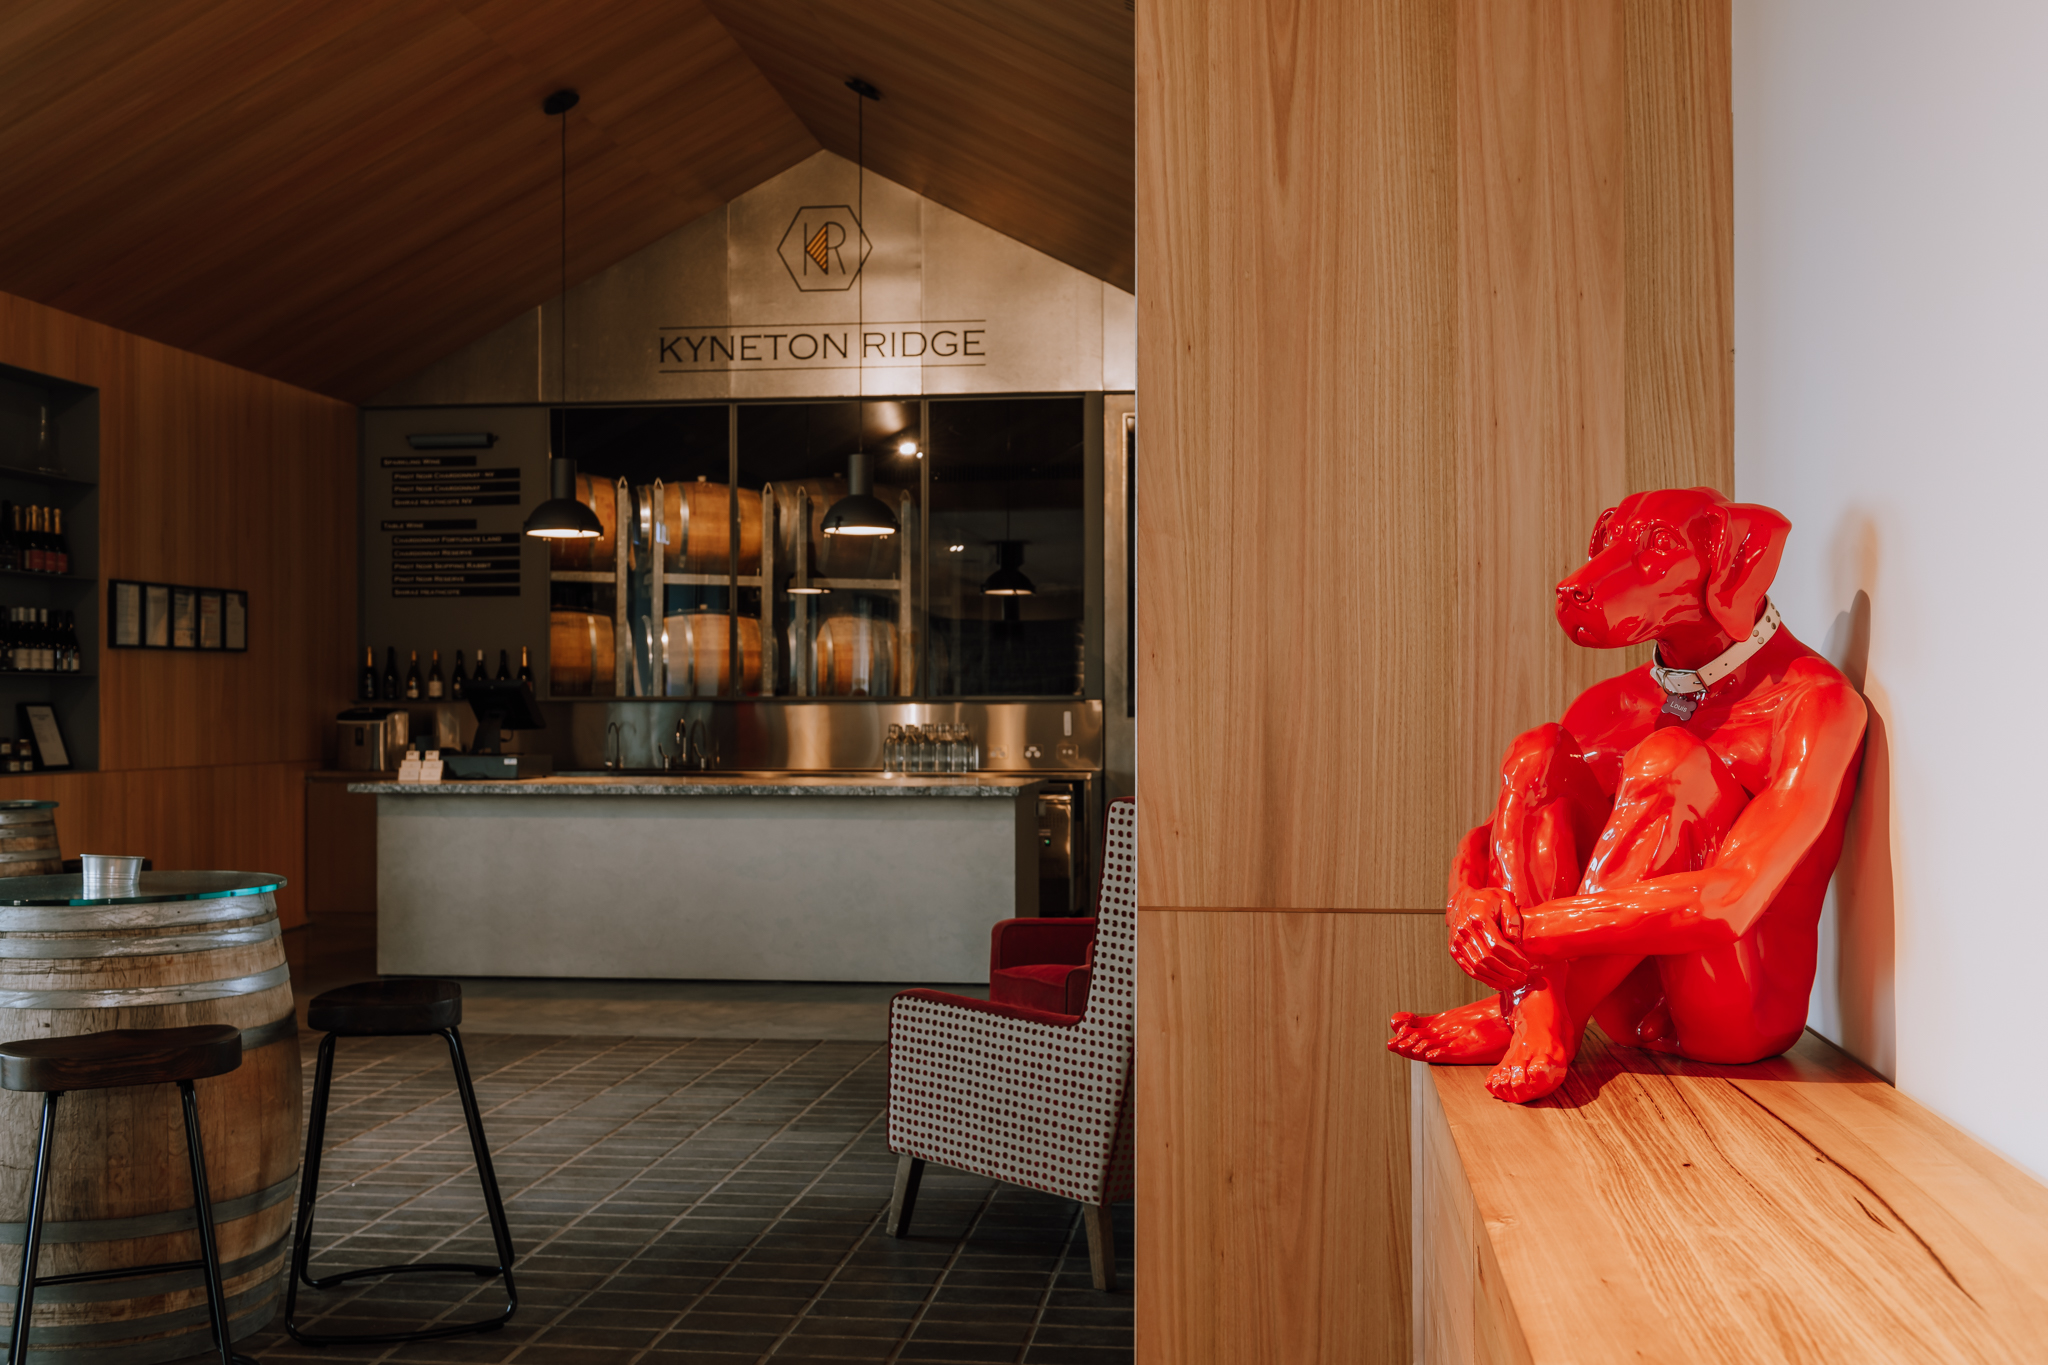 Kyneton Ridge bar with a statue of a red dog 